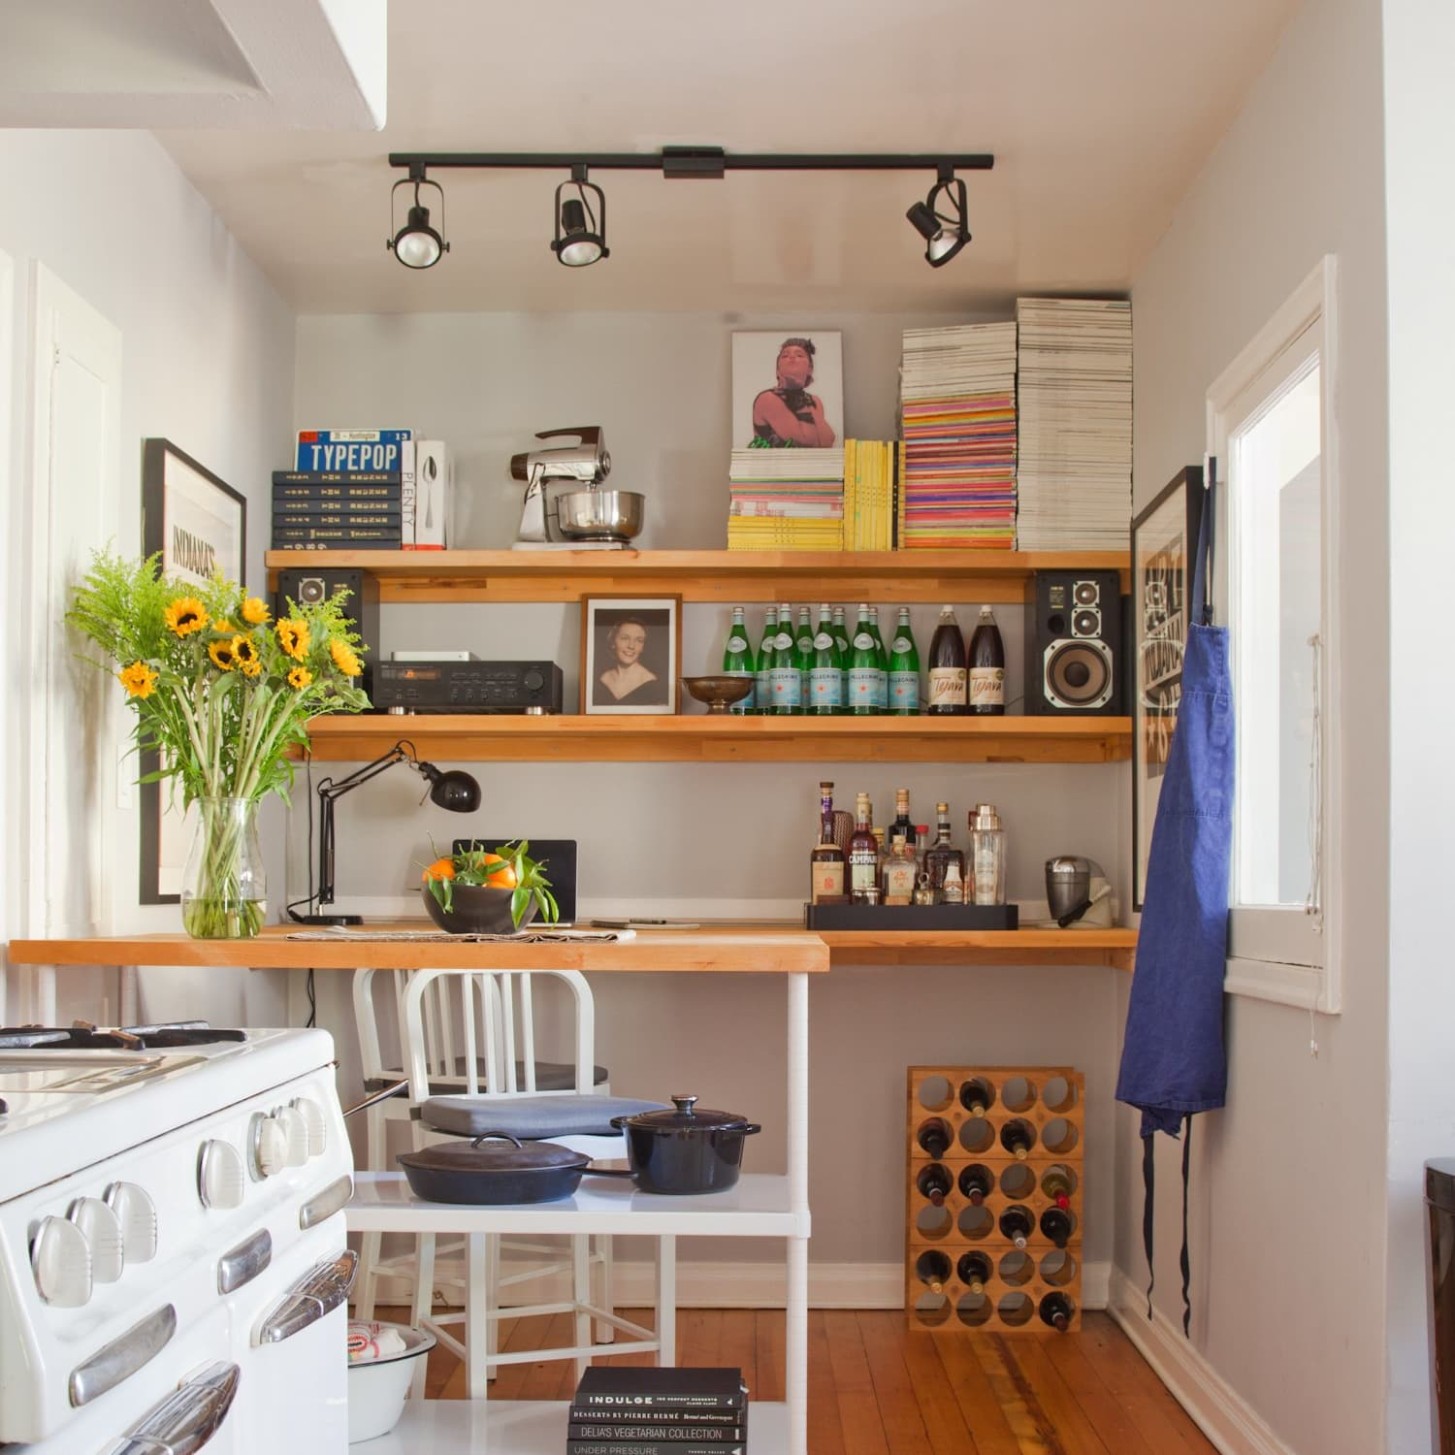 10 Ways to Make a Small Kitchen Look Infinitely Bigger  Apartment  - how do you make a small kitchen look bigger?